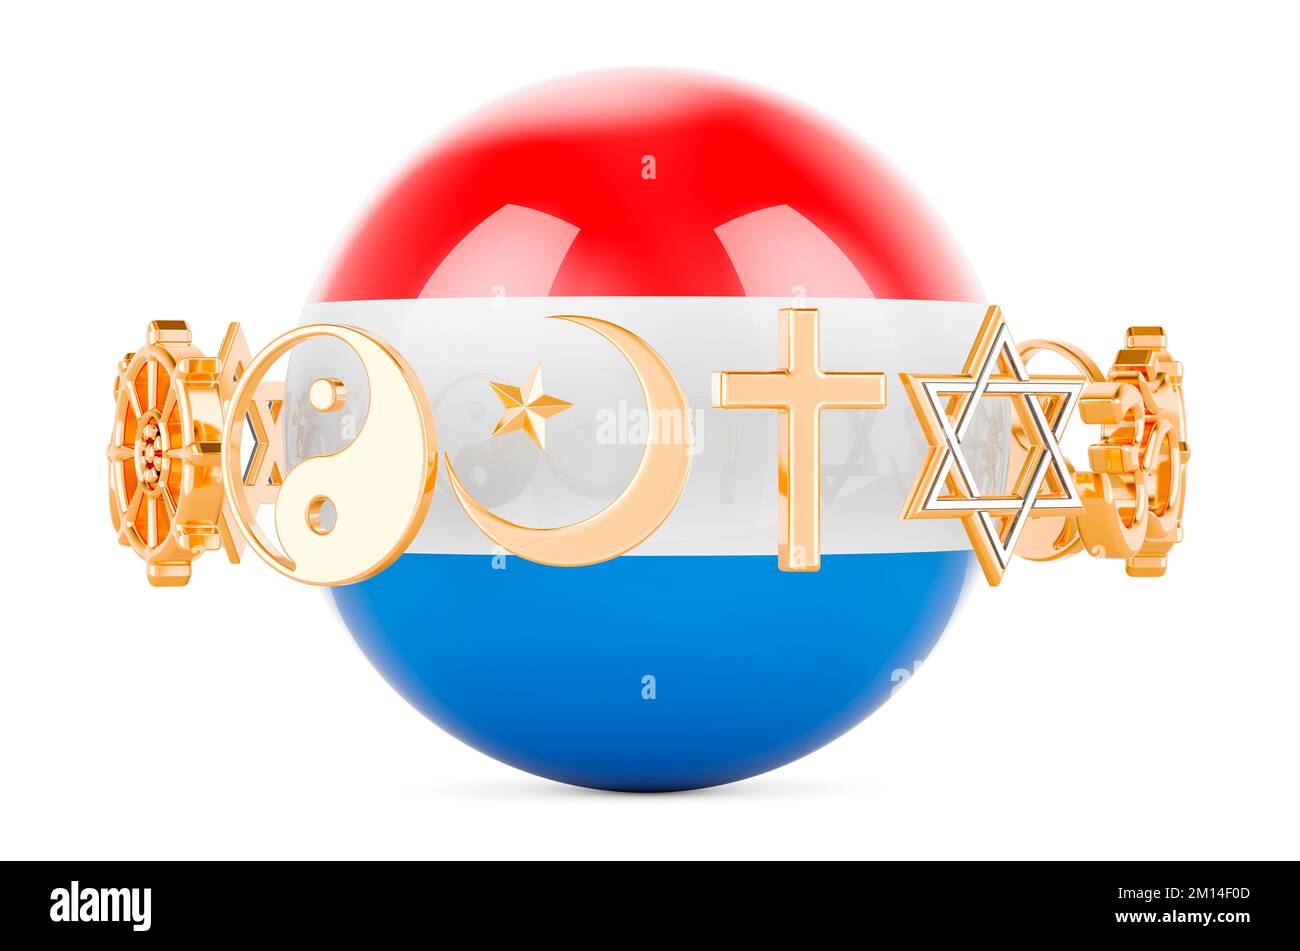 Luxembourgish flag painted on sphere with religions symbols around, 3D rendering isolated on white background Stock Photo